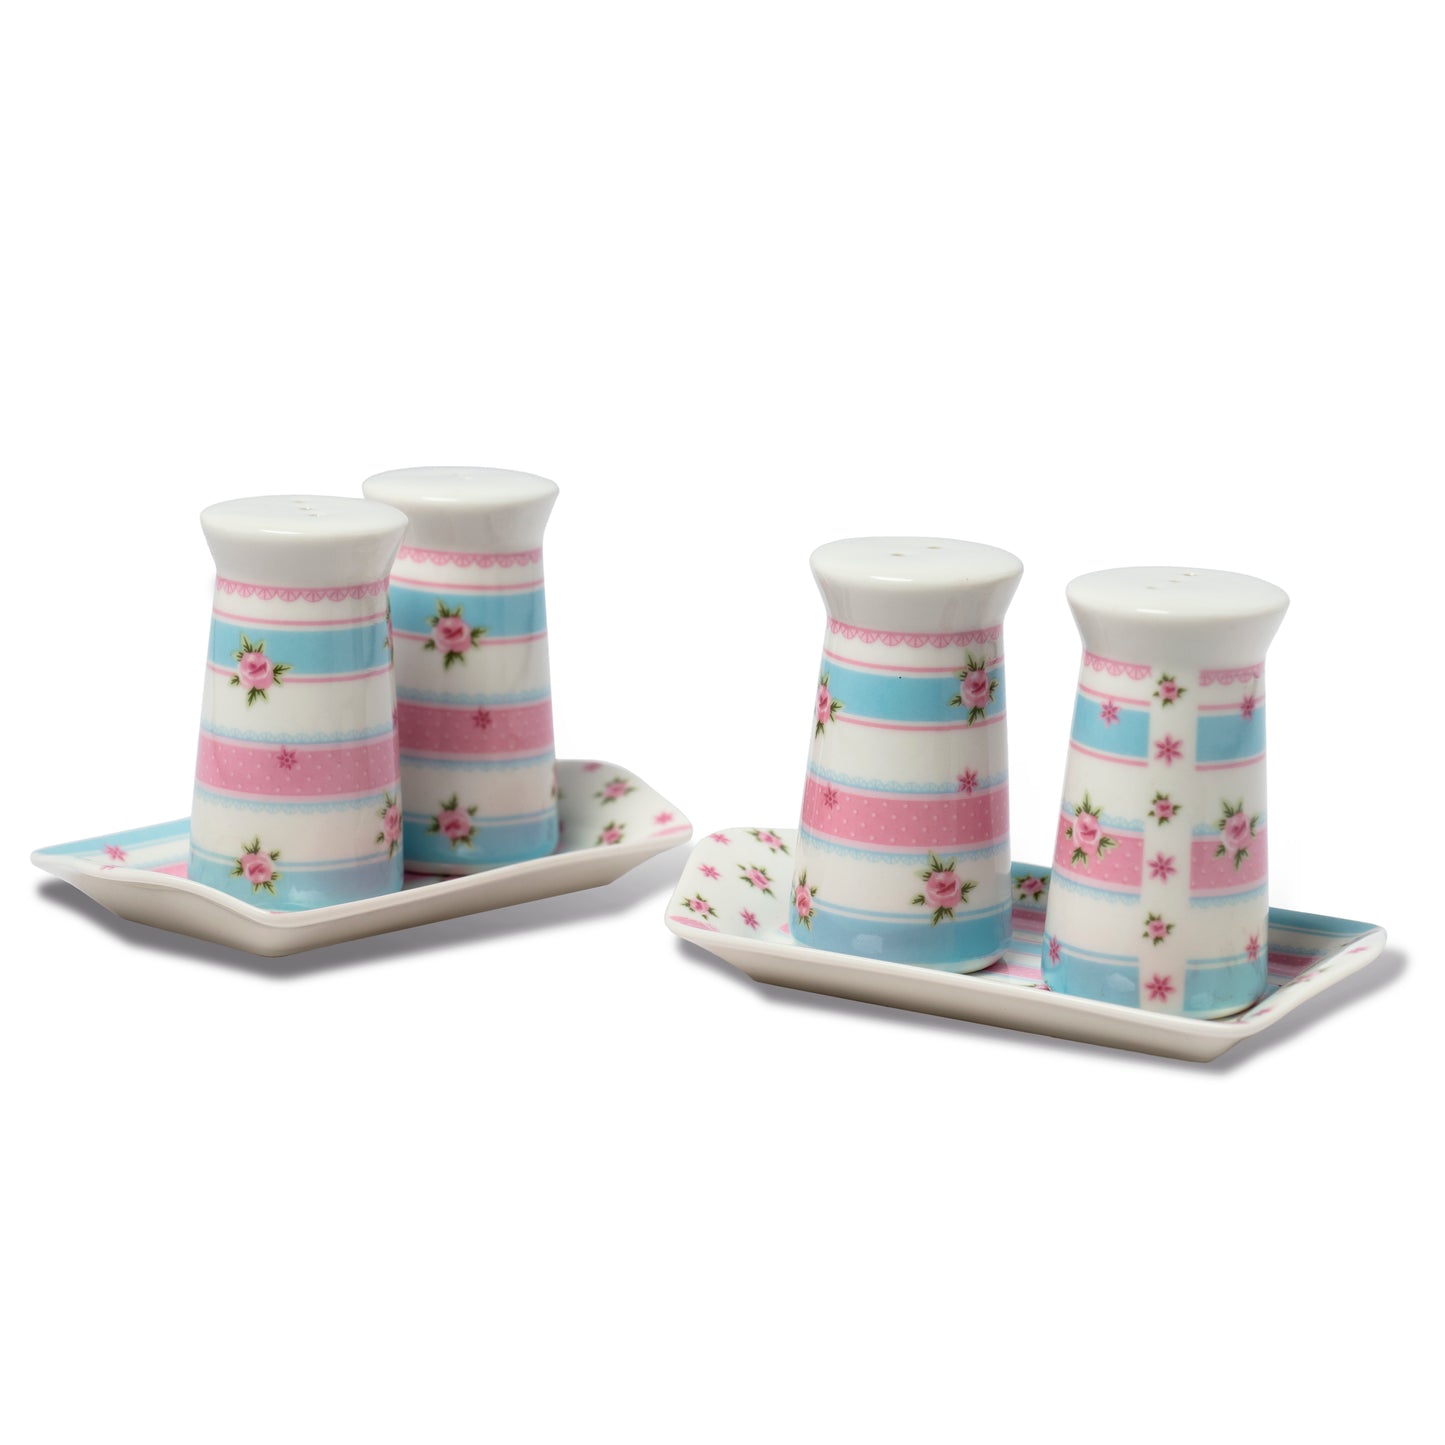 Ceramic Salt And Pepper Shakers With Tray